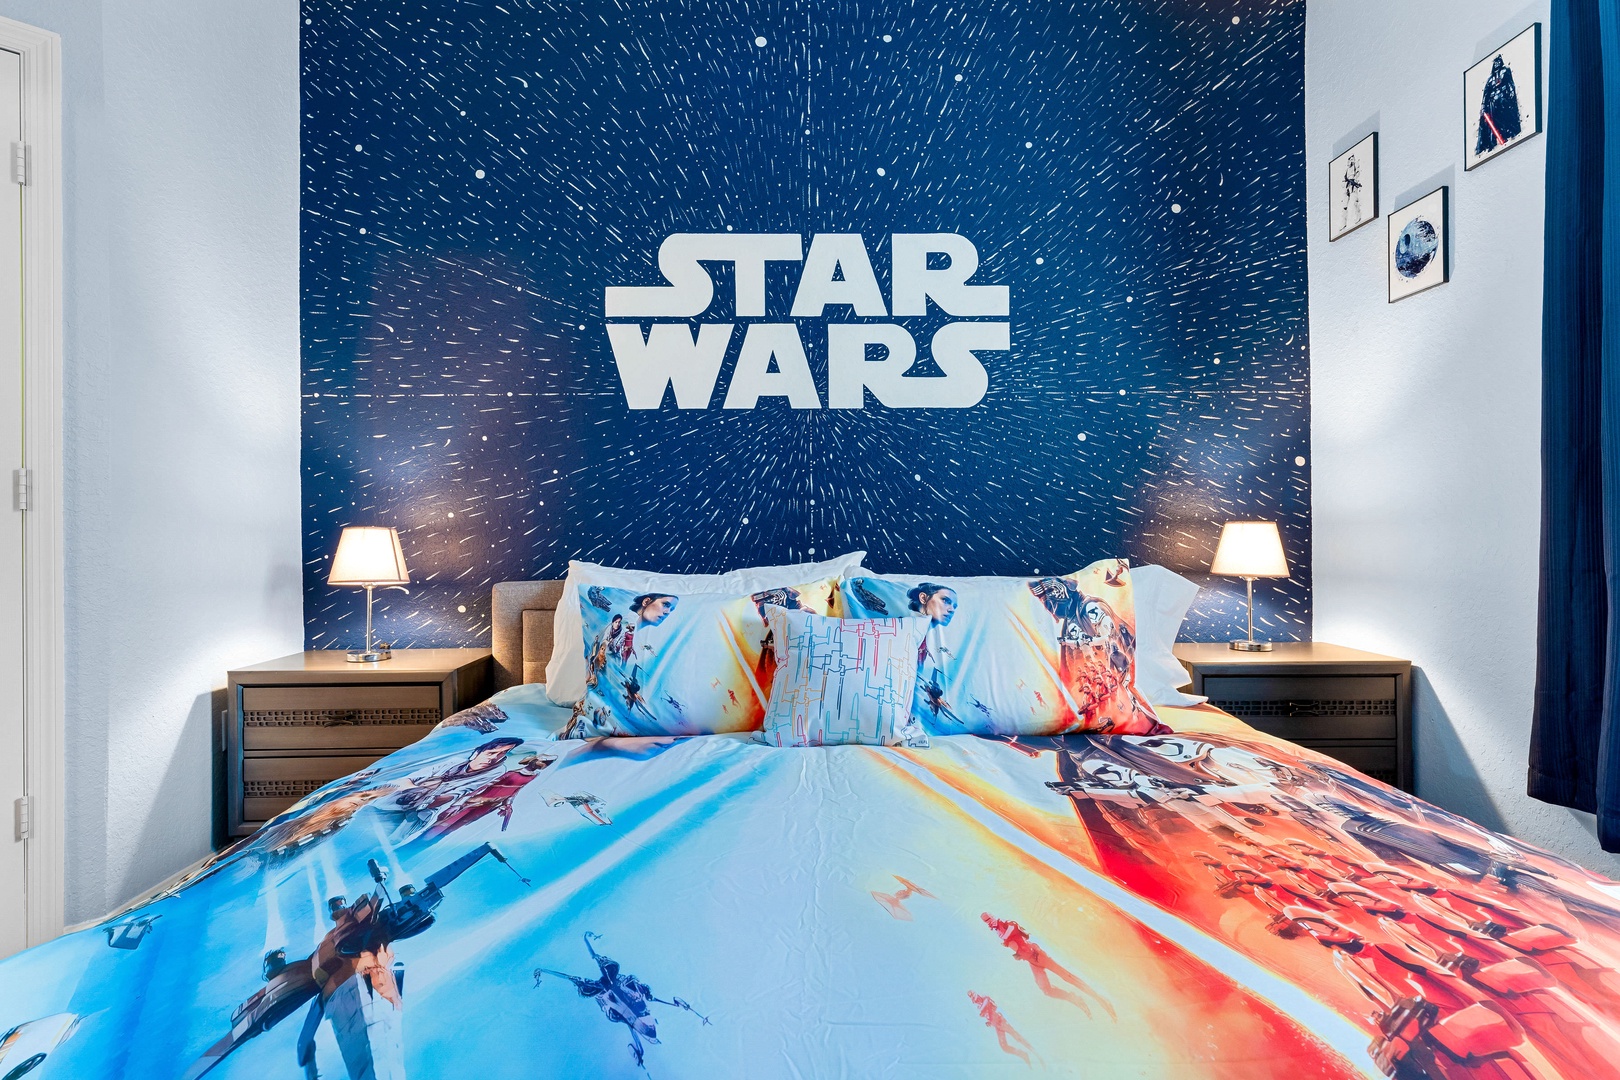 "The Force is strong with this one" Themed bedrooms with lush bedding